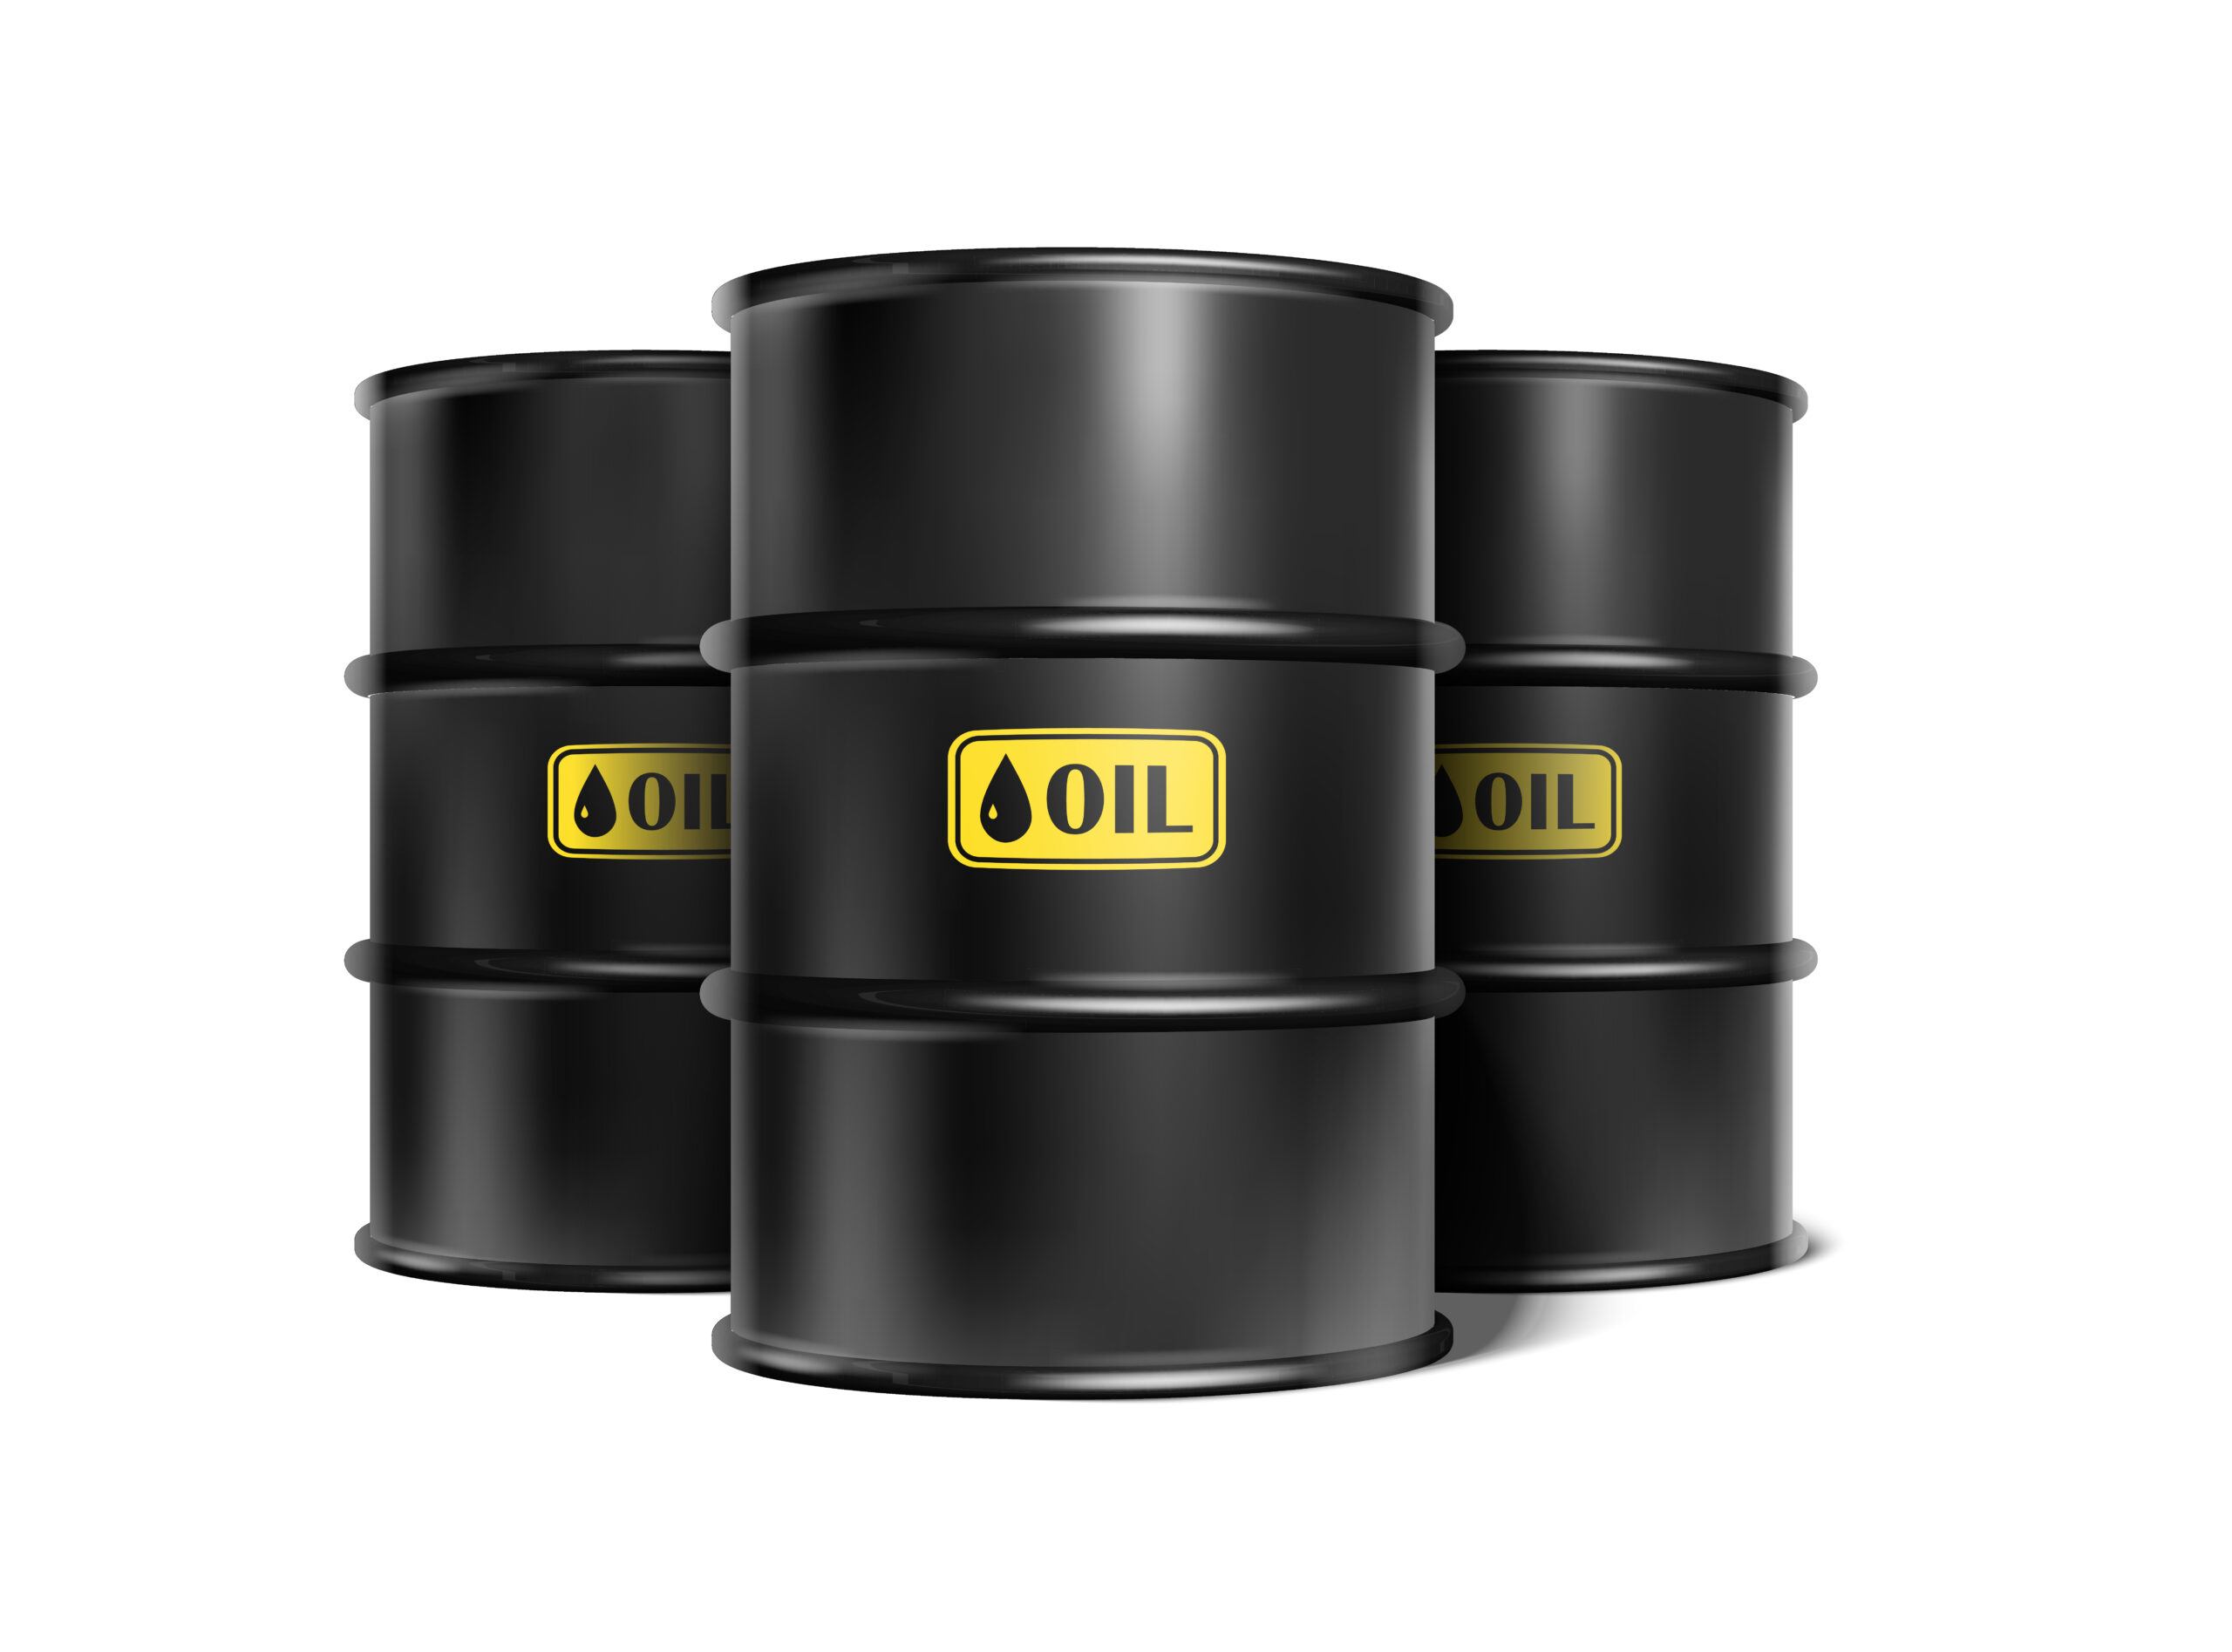 picture of oil barrels which is a commodity 